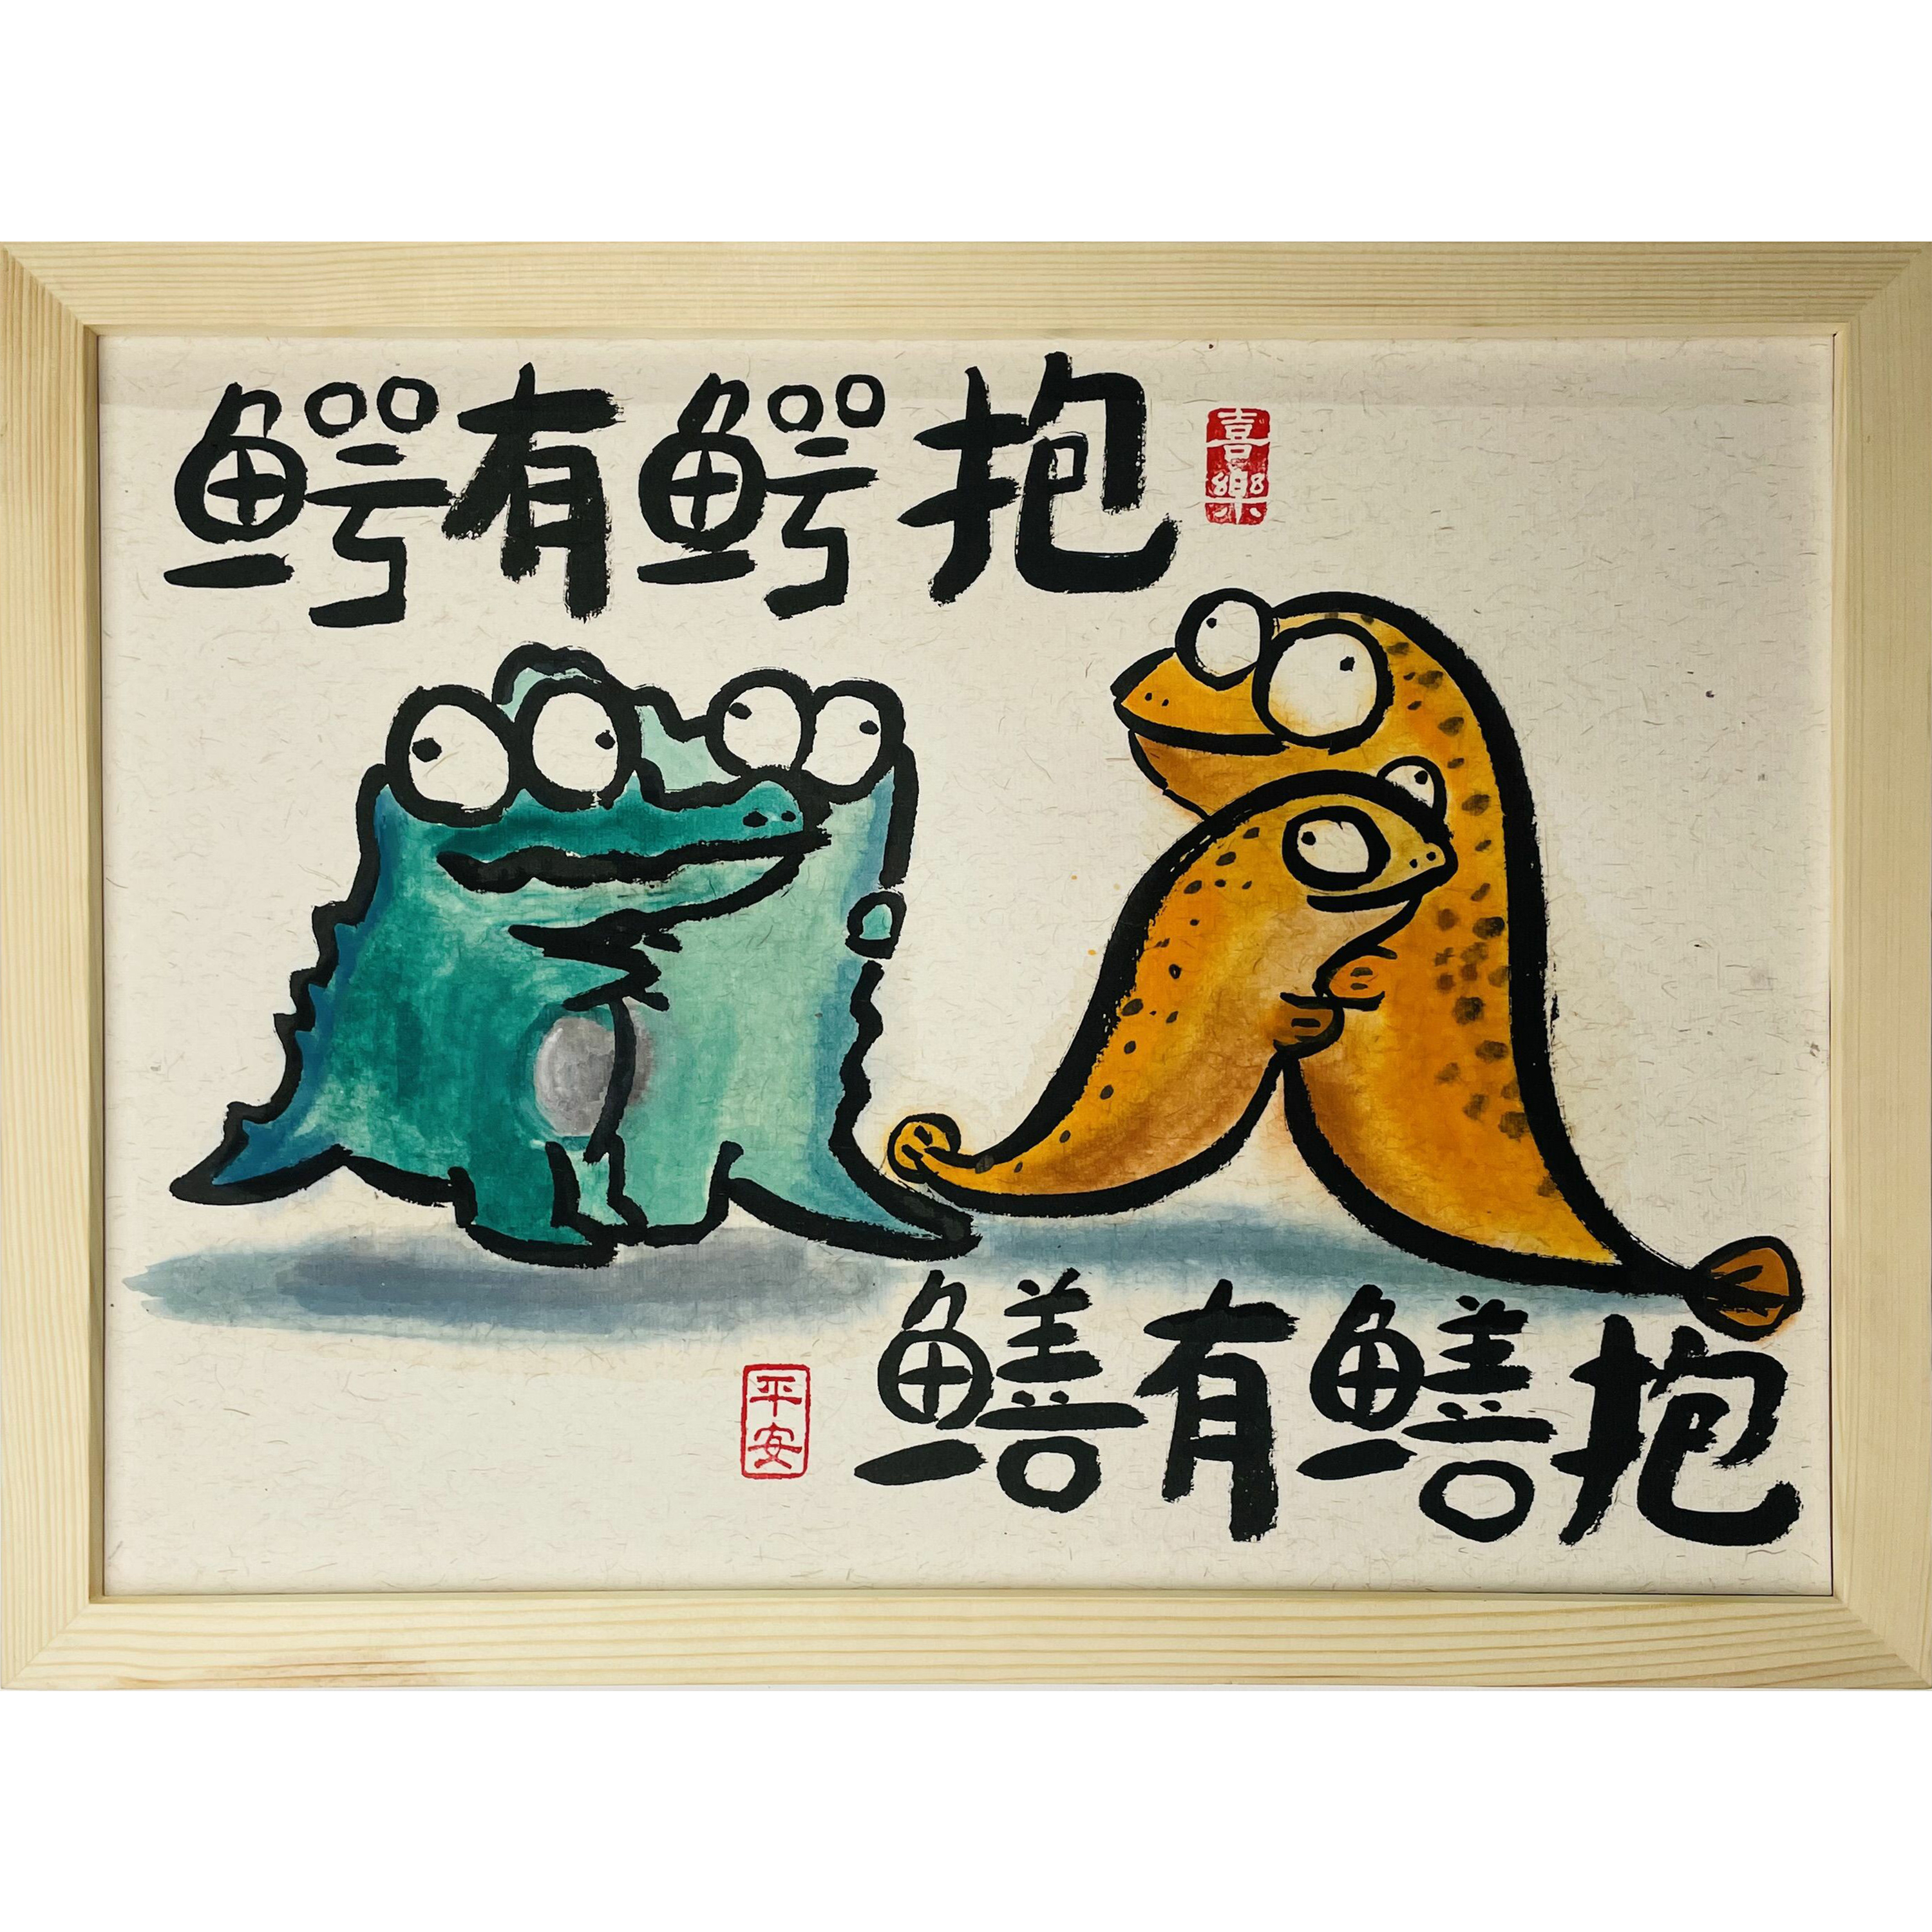 General 3000x3000 humor animals crocodiles frame Chinese hugging picture frames wood artwork